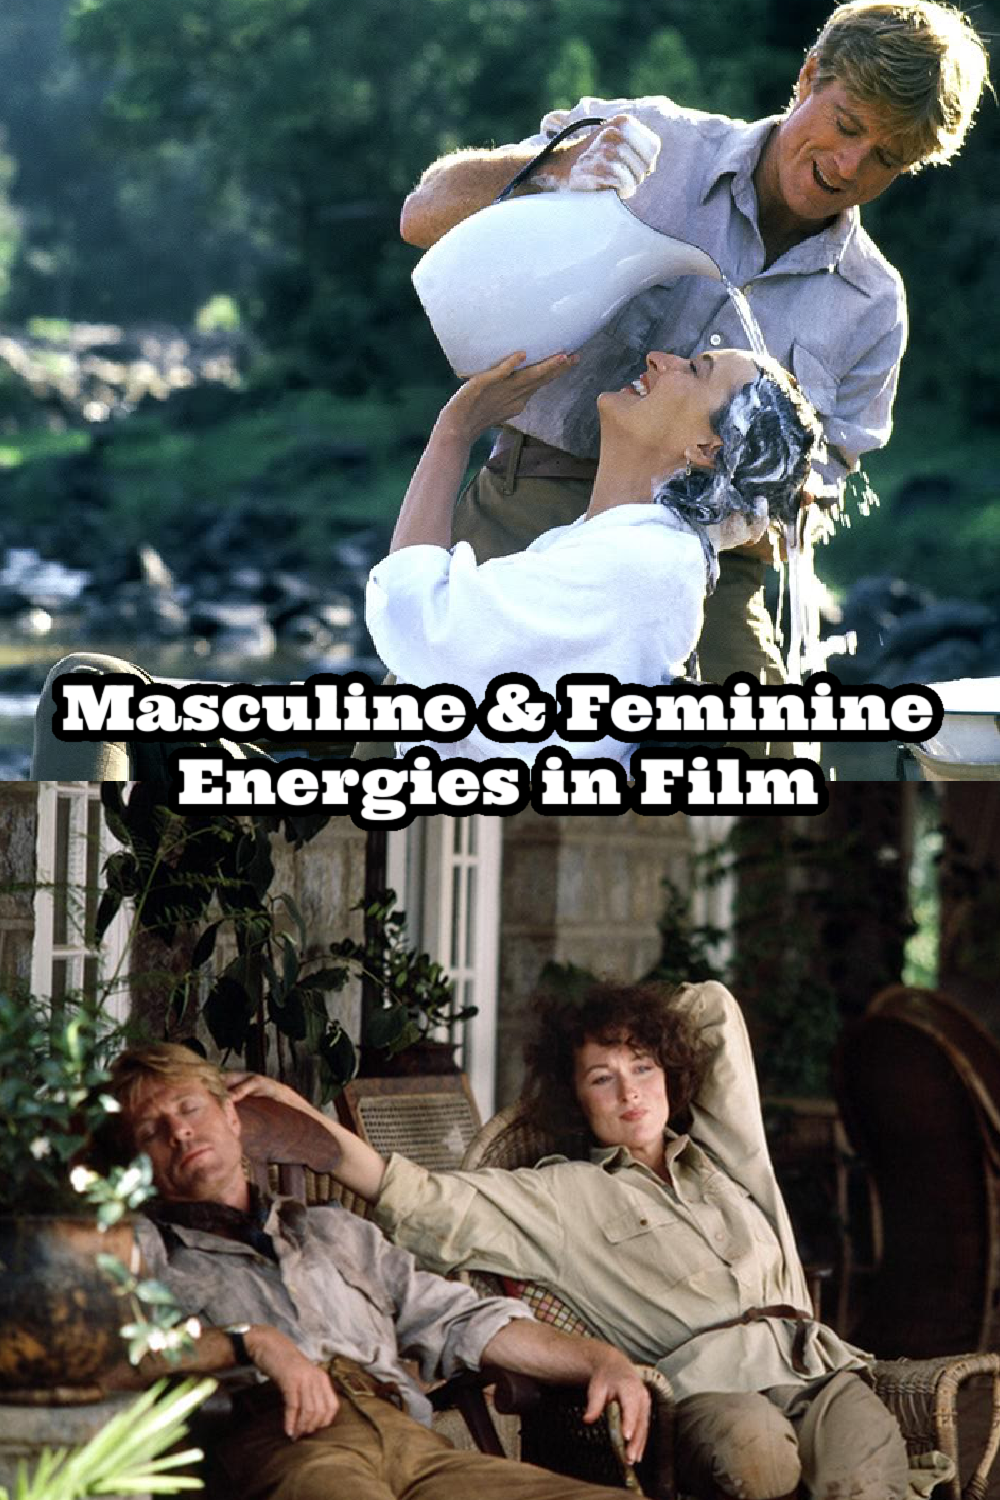 Difference Between Feminine & Masculine Energy in Relationships | Out of Africa Movie Review